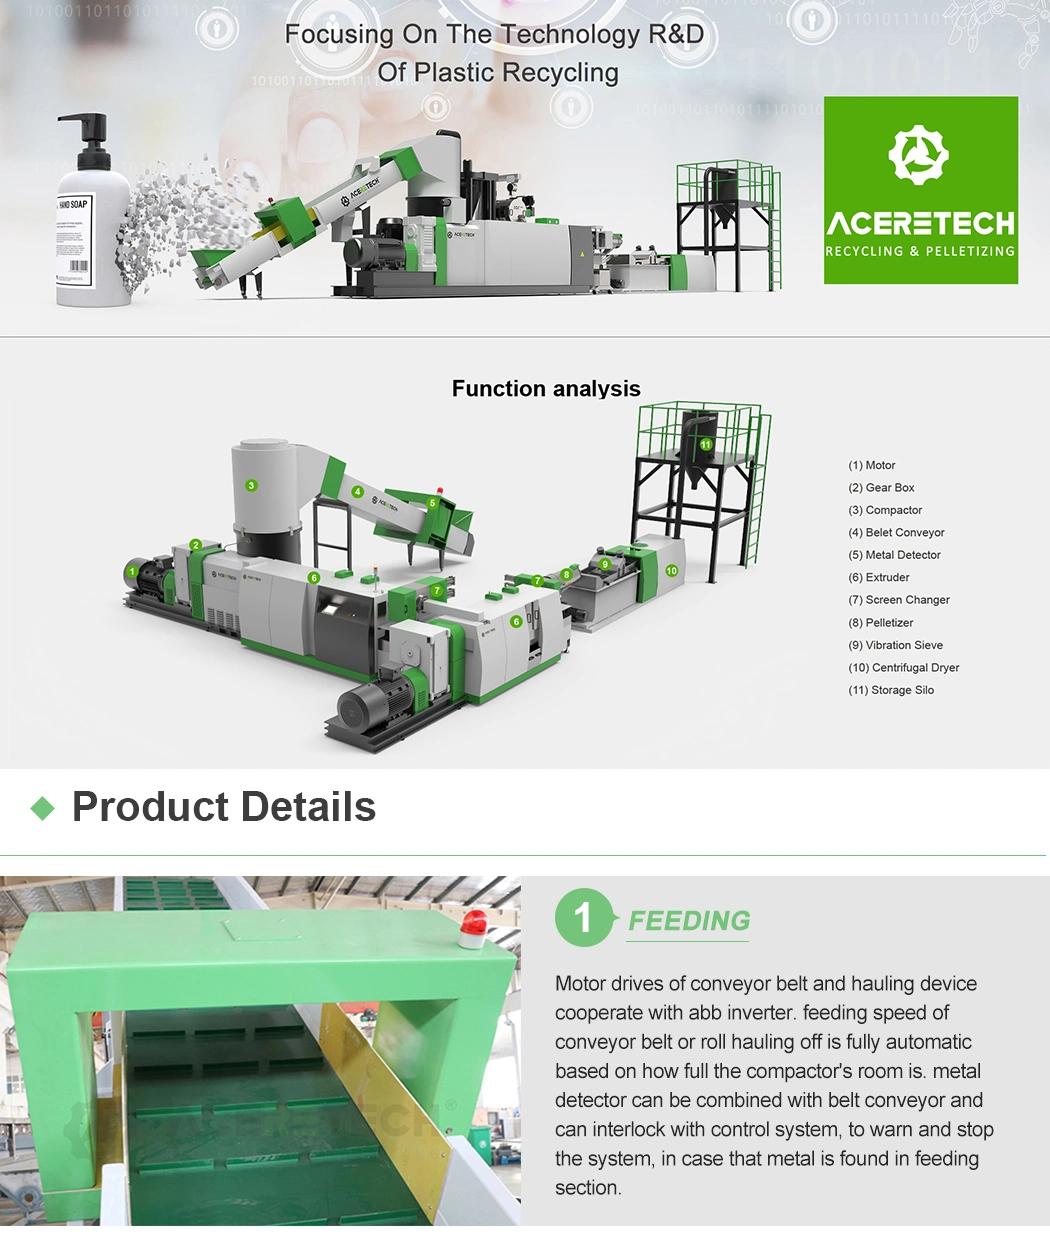 Factory Supplier PVC Plastic Recycling Cable Granulator Equipment for Sale